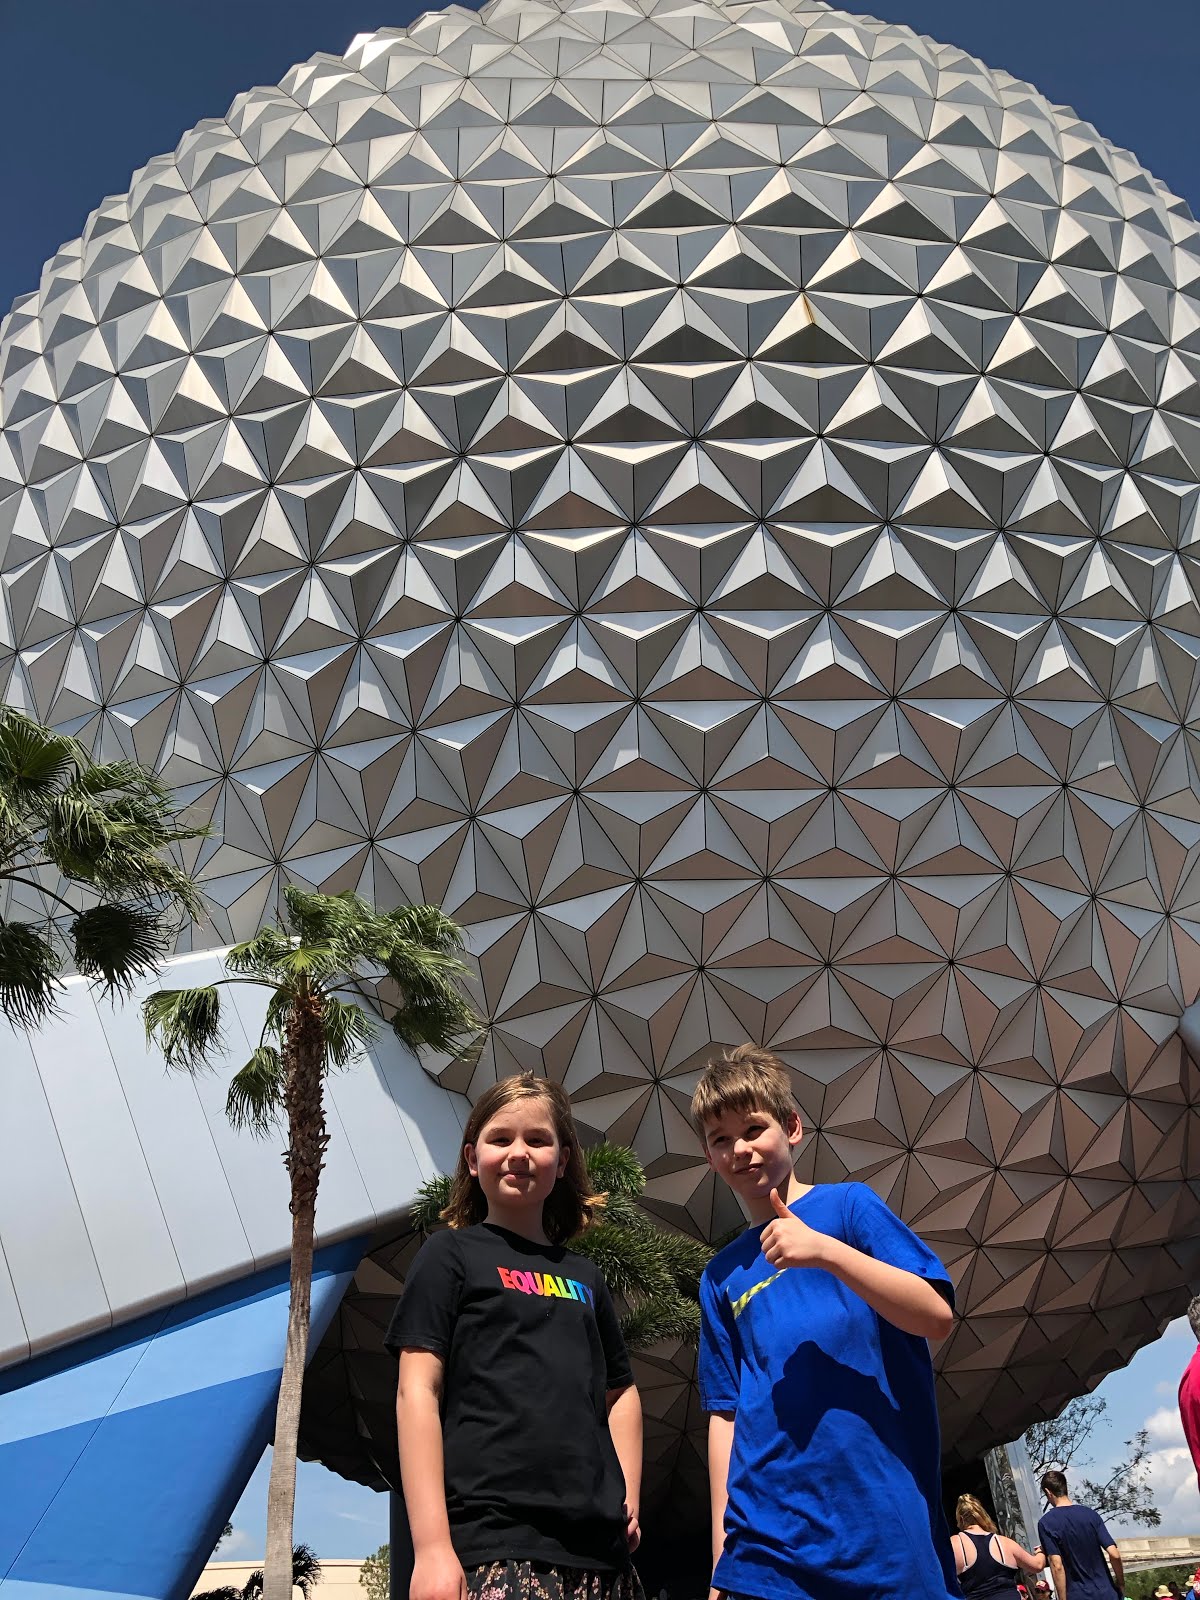 Kids in Epcot